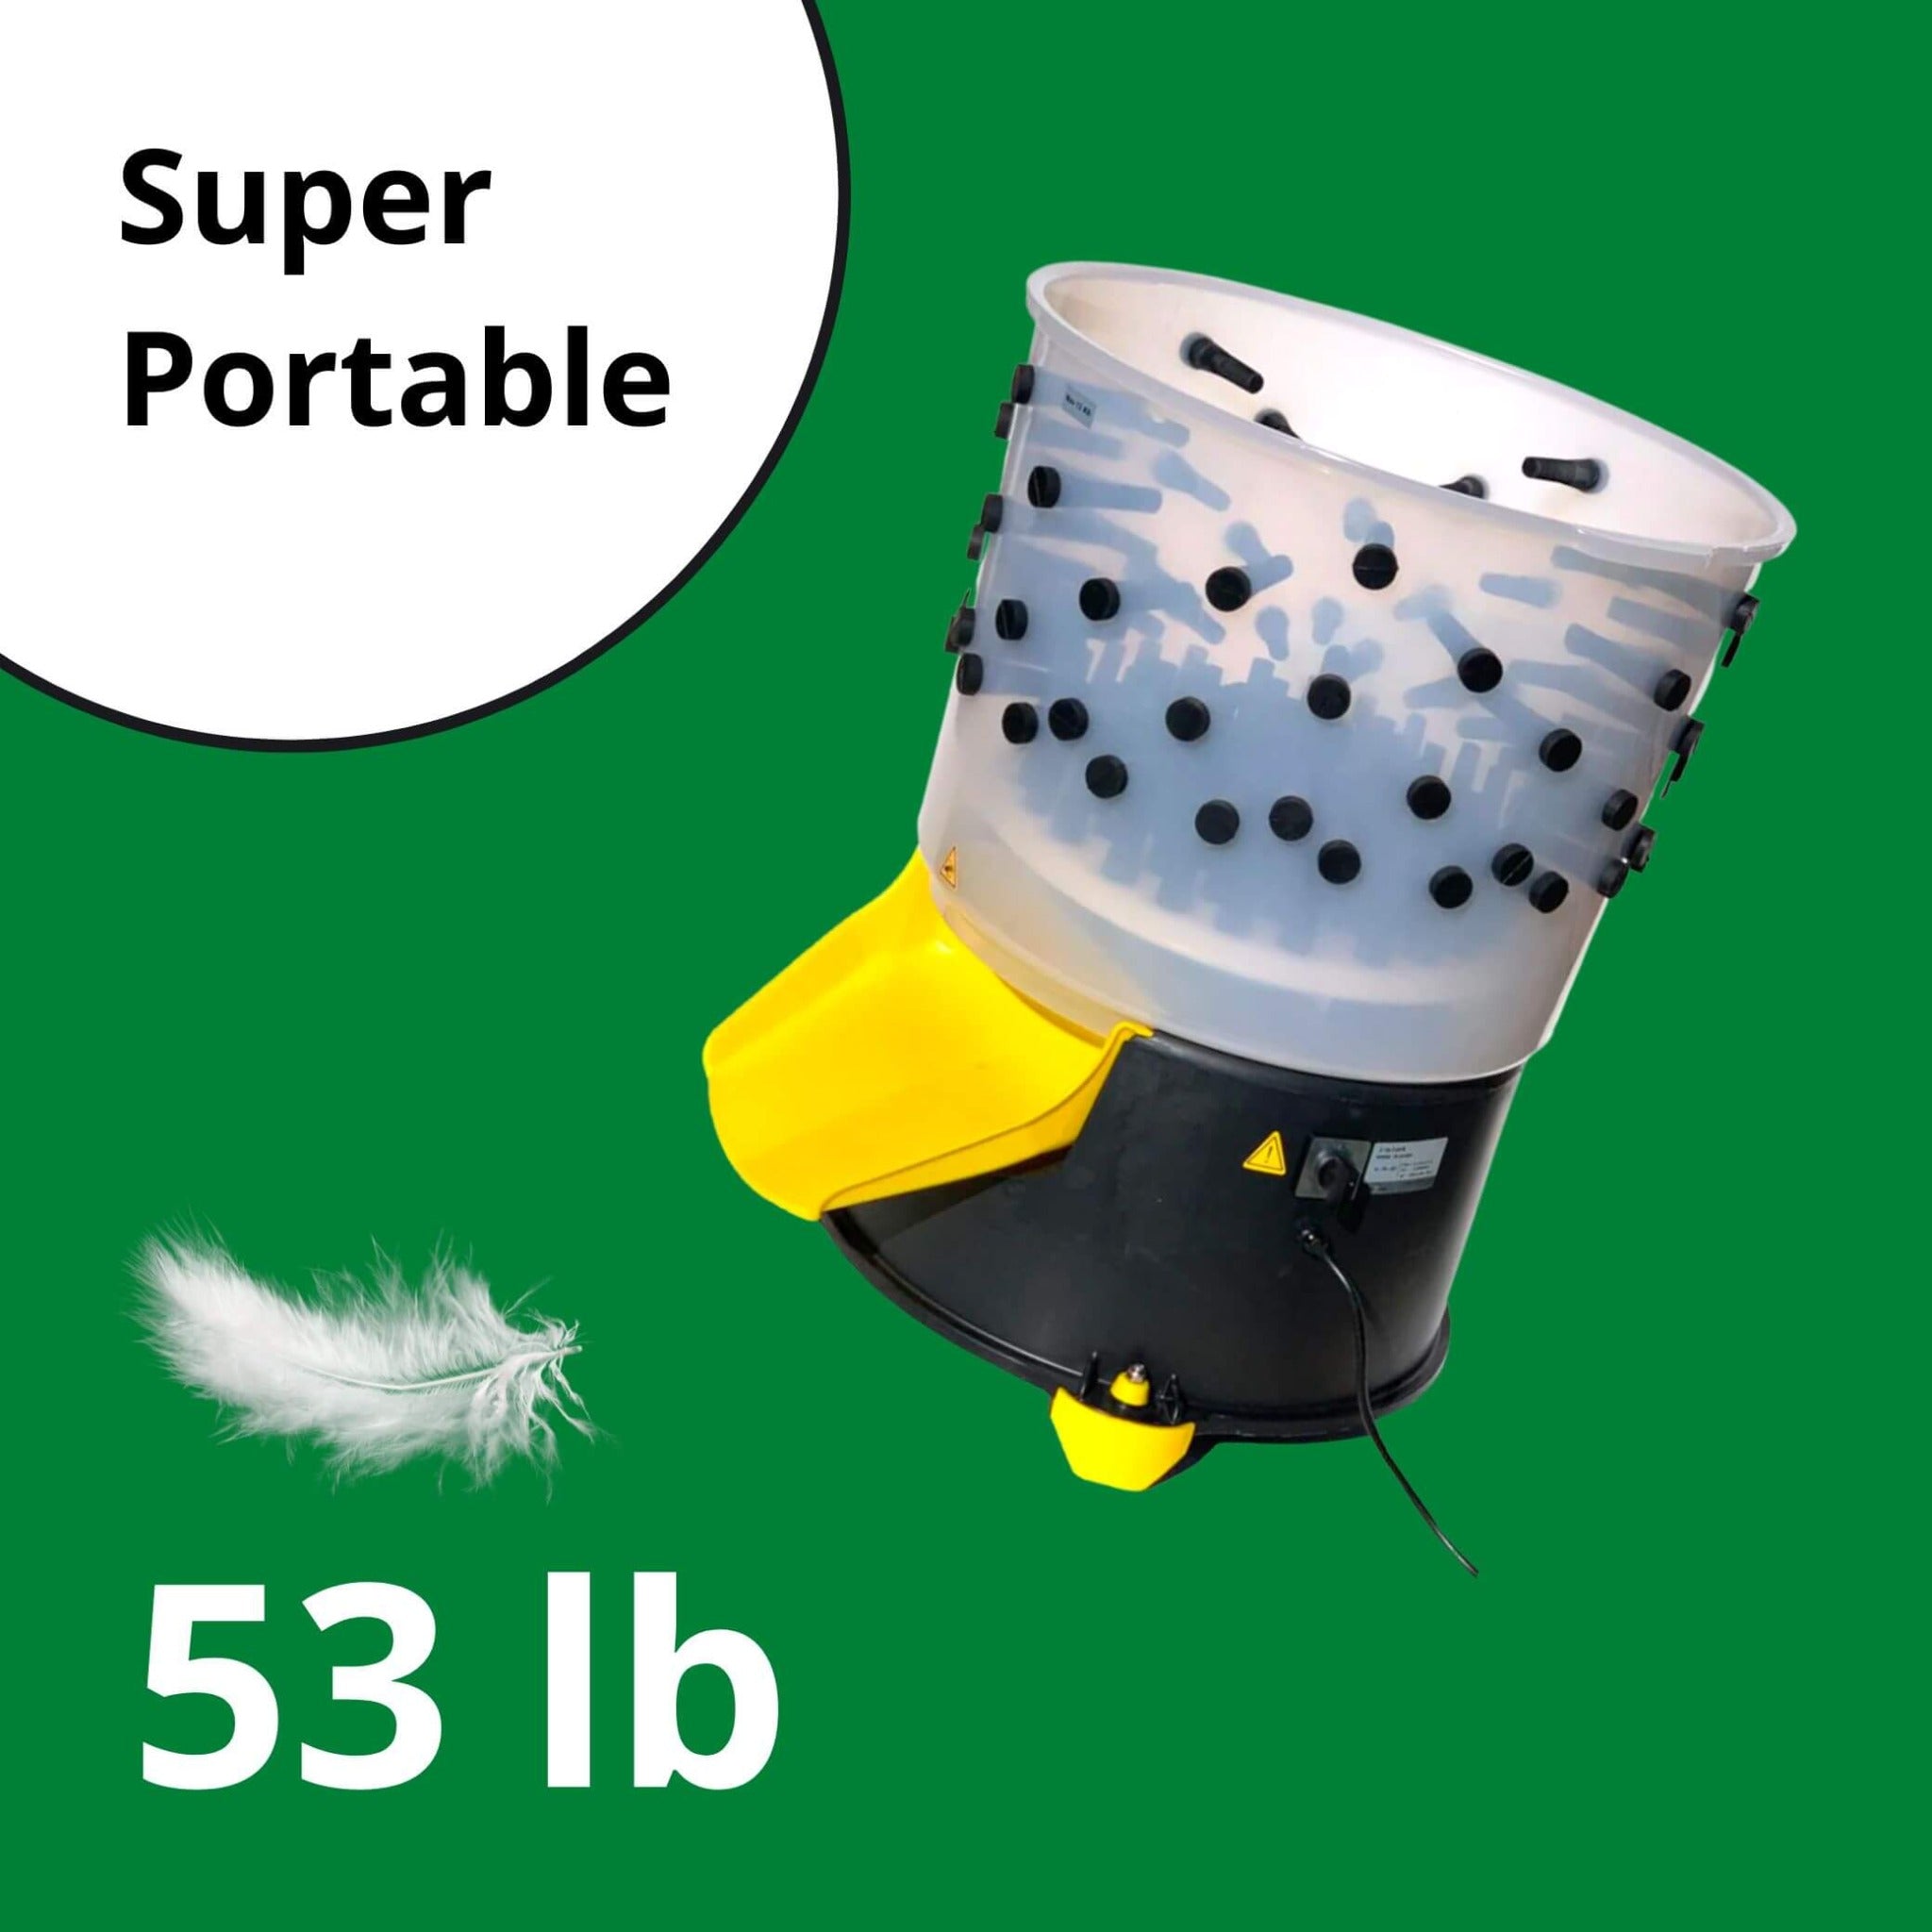 Hatching Time Cimuka. Side view of feather plucker. Text reads “Super Portable 53lb”